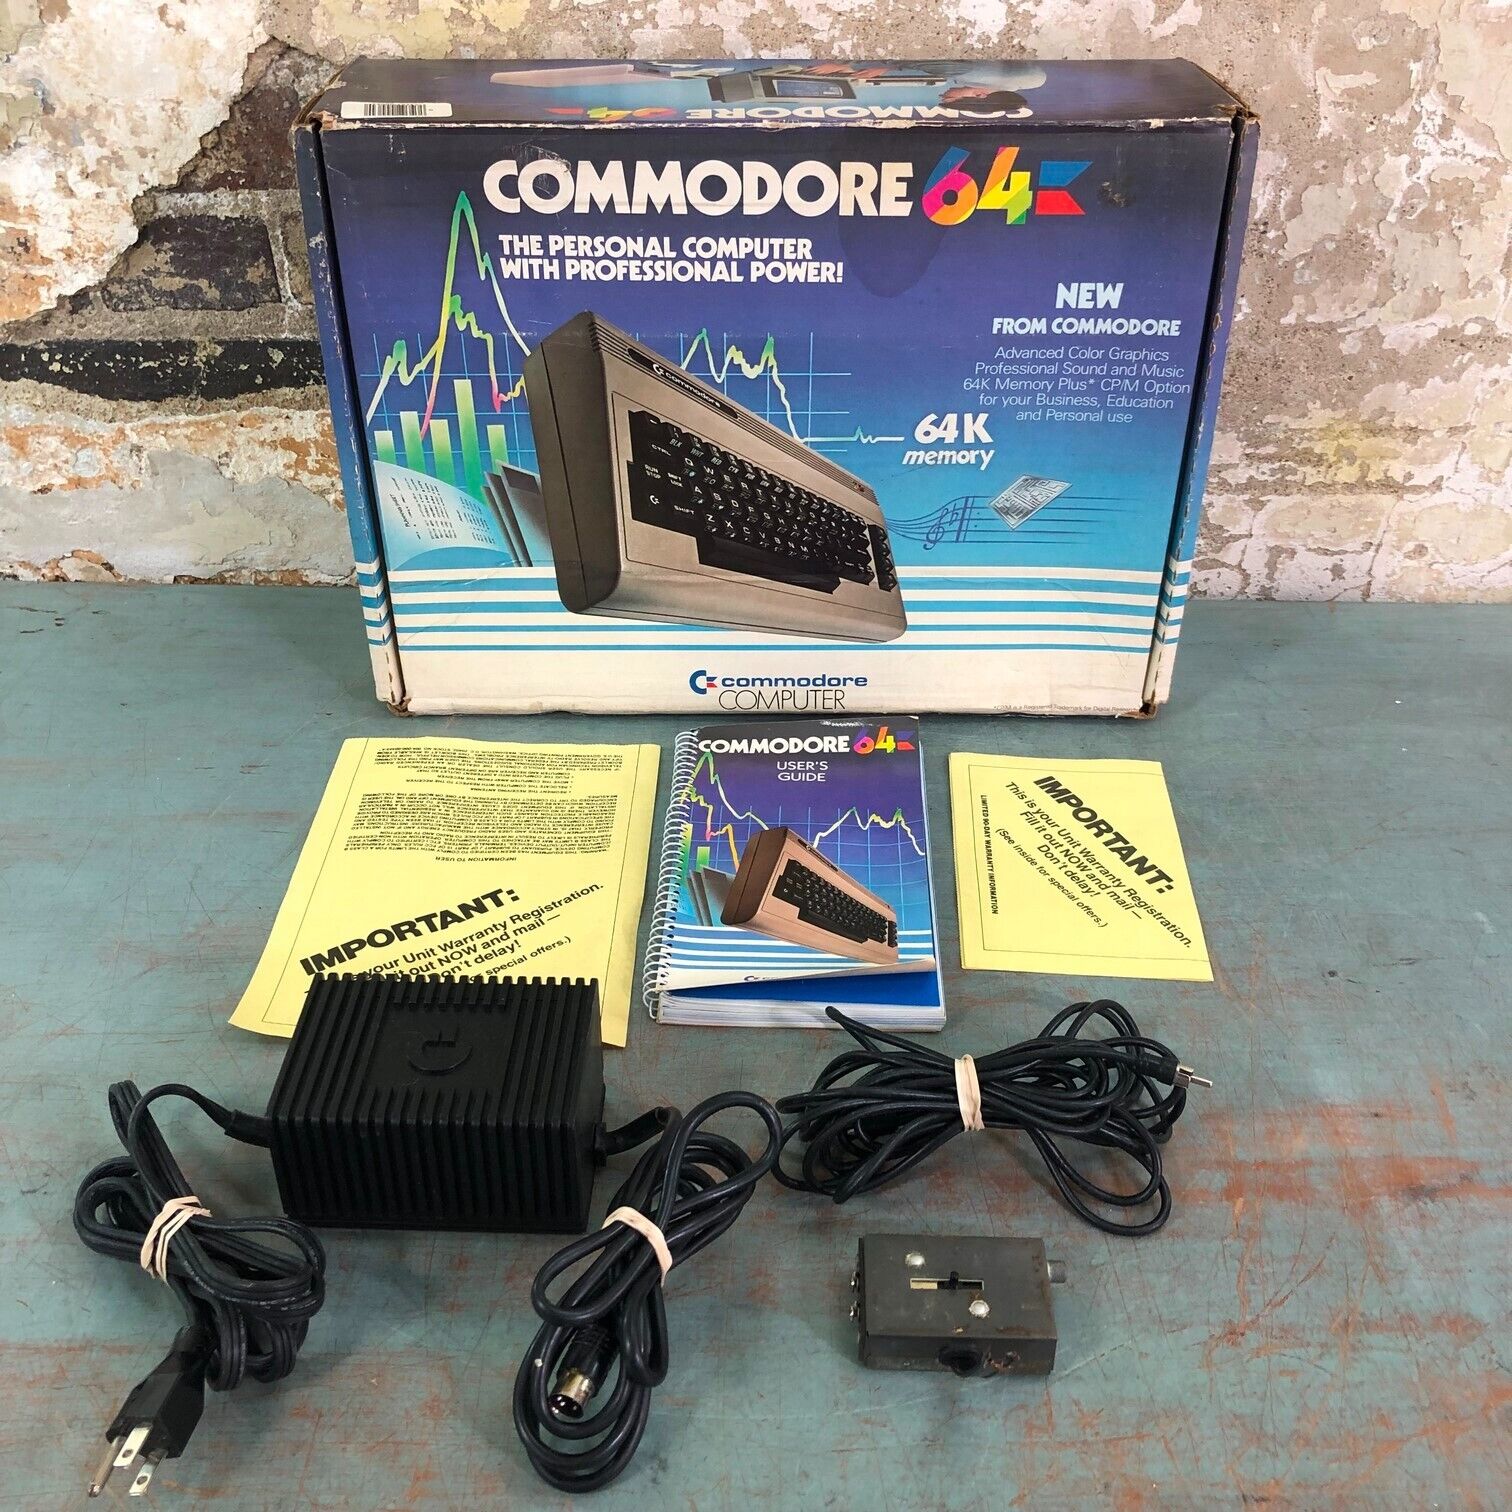 Vintage Commodore 64 C64 Computer Box with Manuals & Power Supply